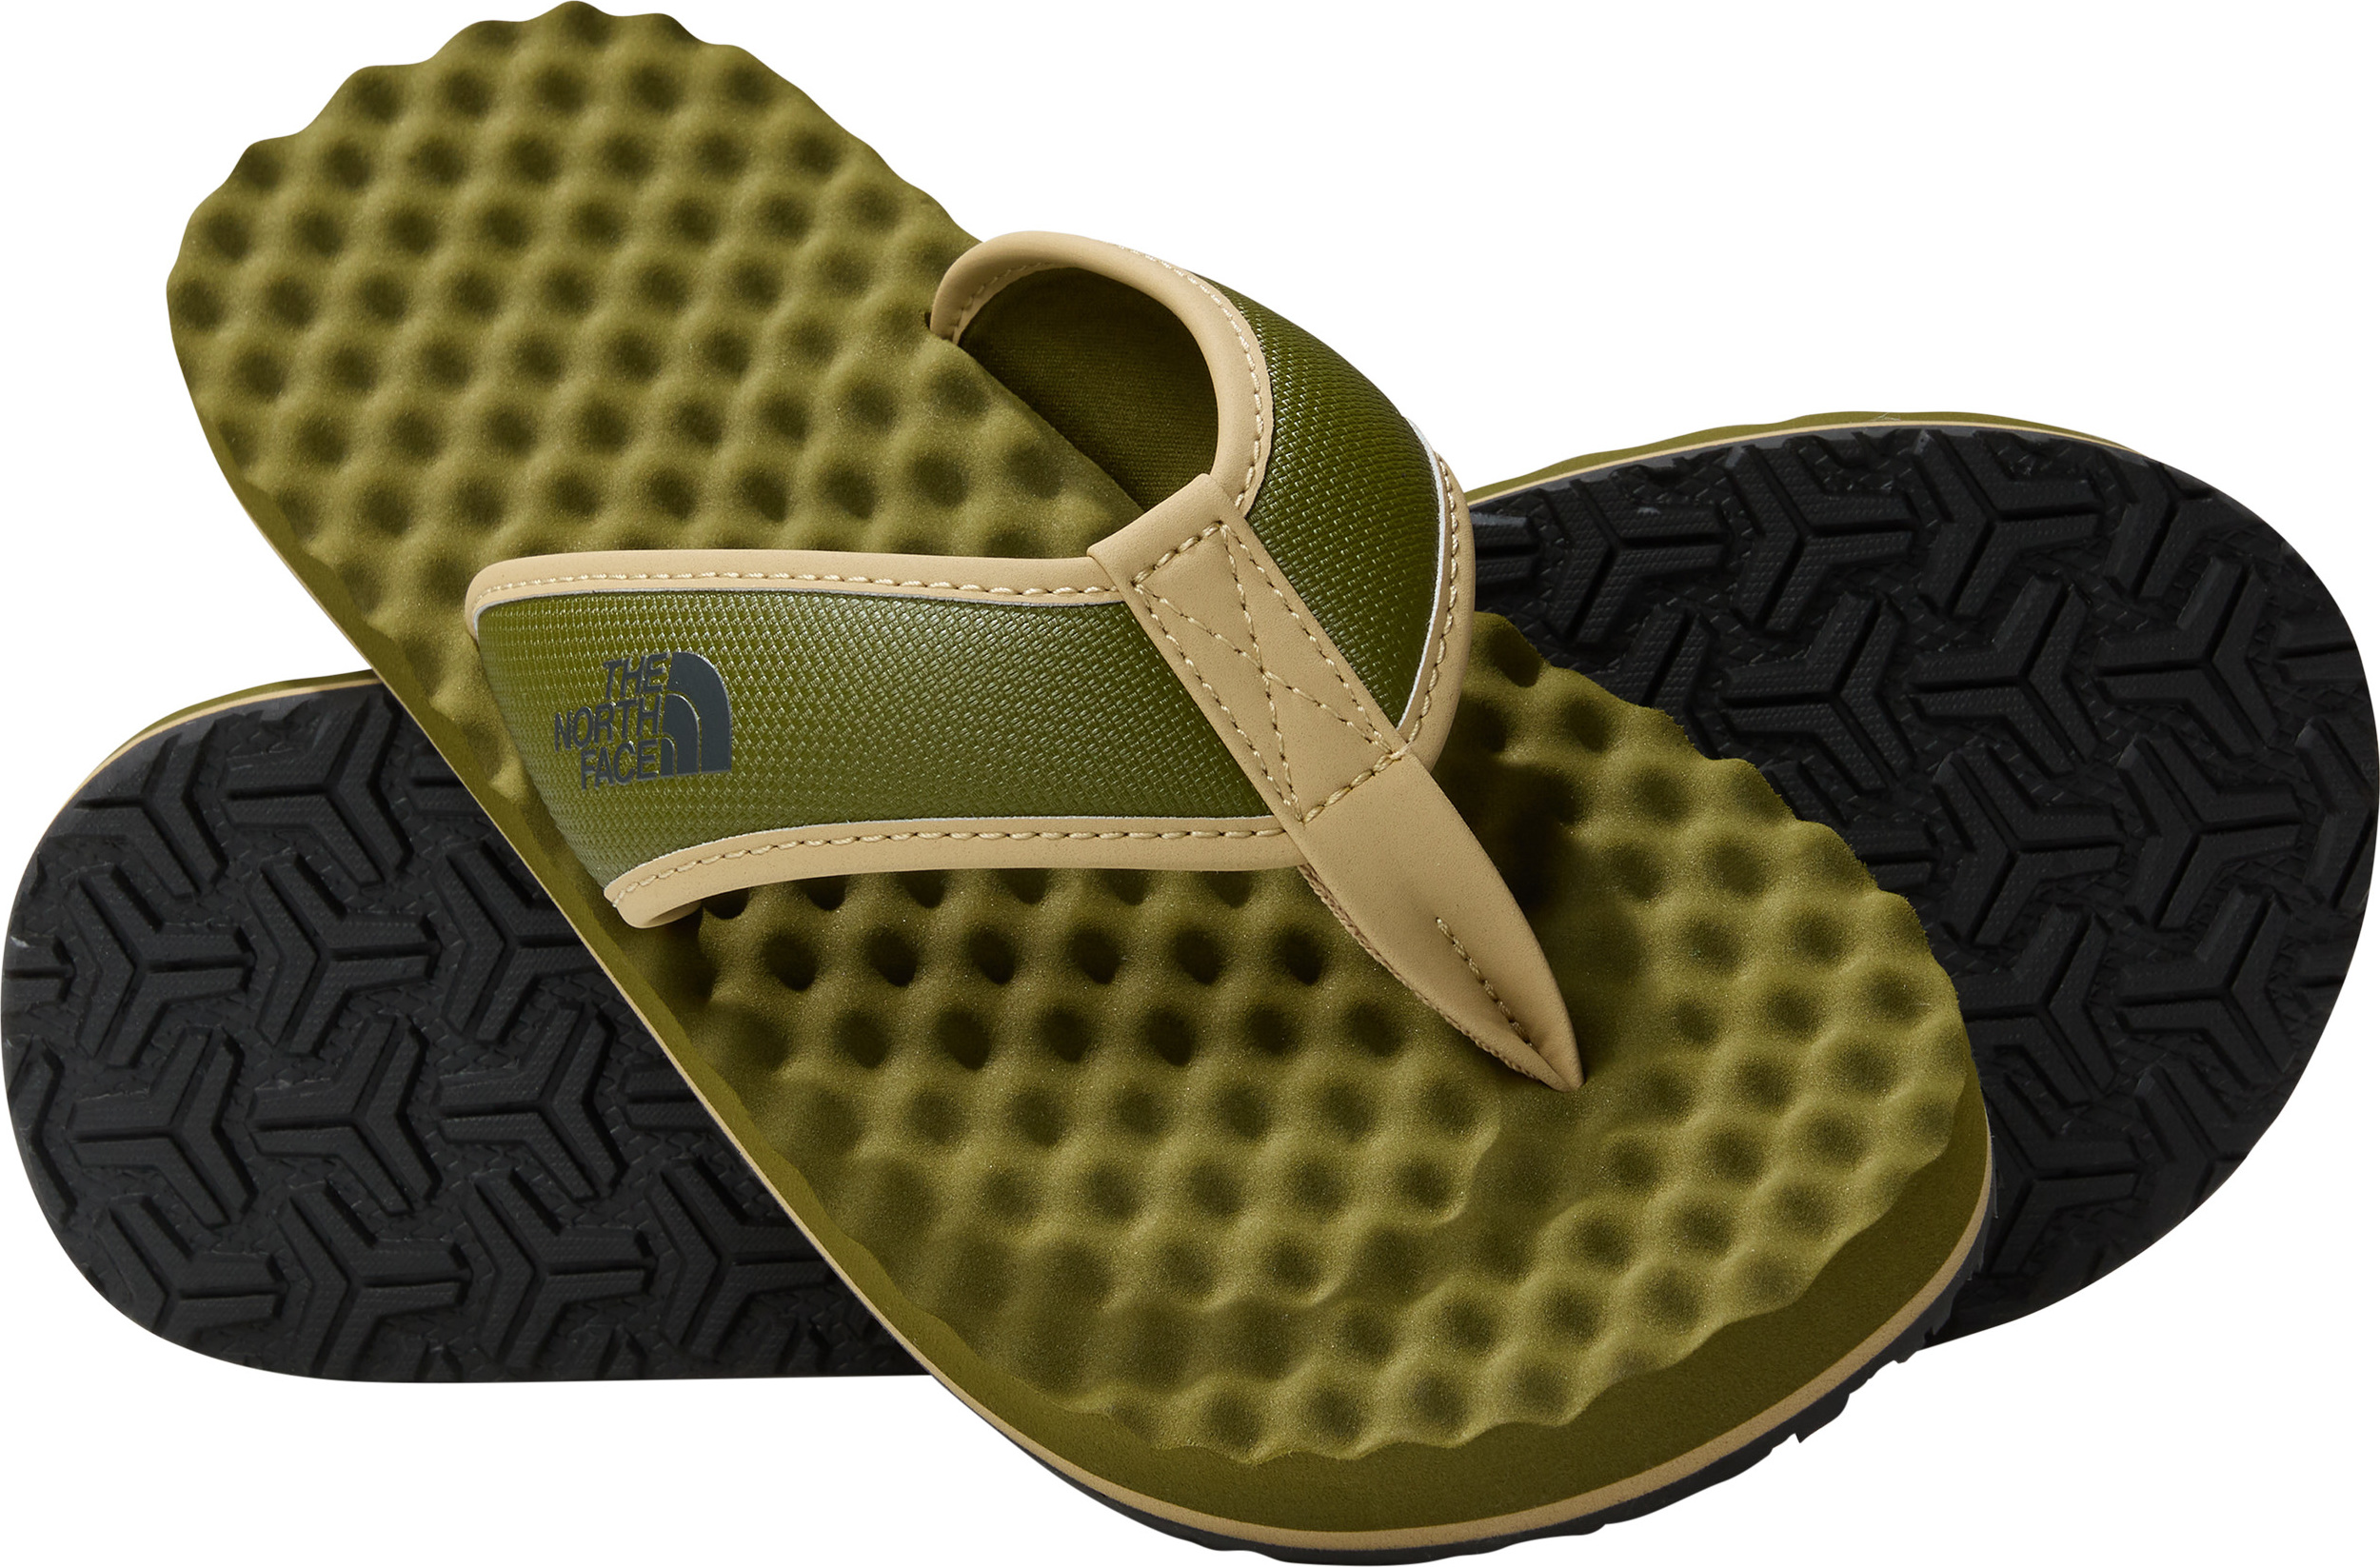 The North Face The North Face Men's Base Cap II Flip-Flops Forest Olive/Forest Olive 39, Forest Olive/Forest Oli